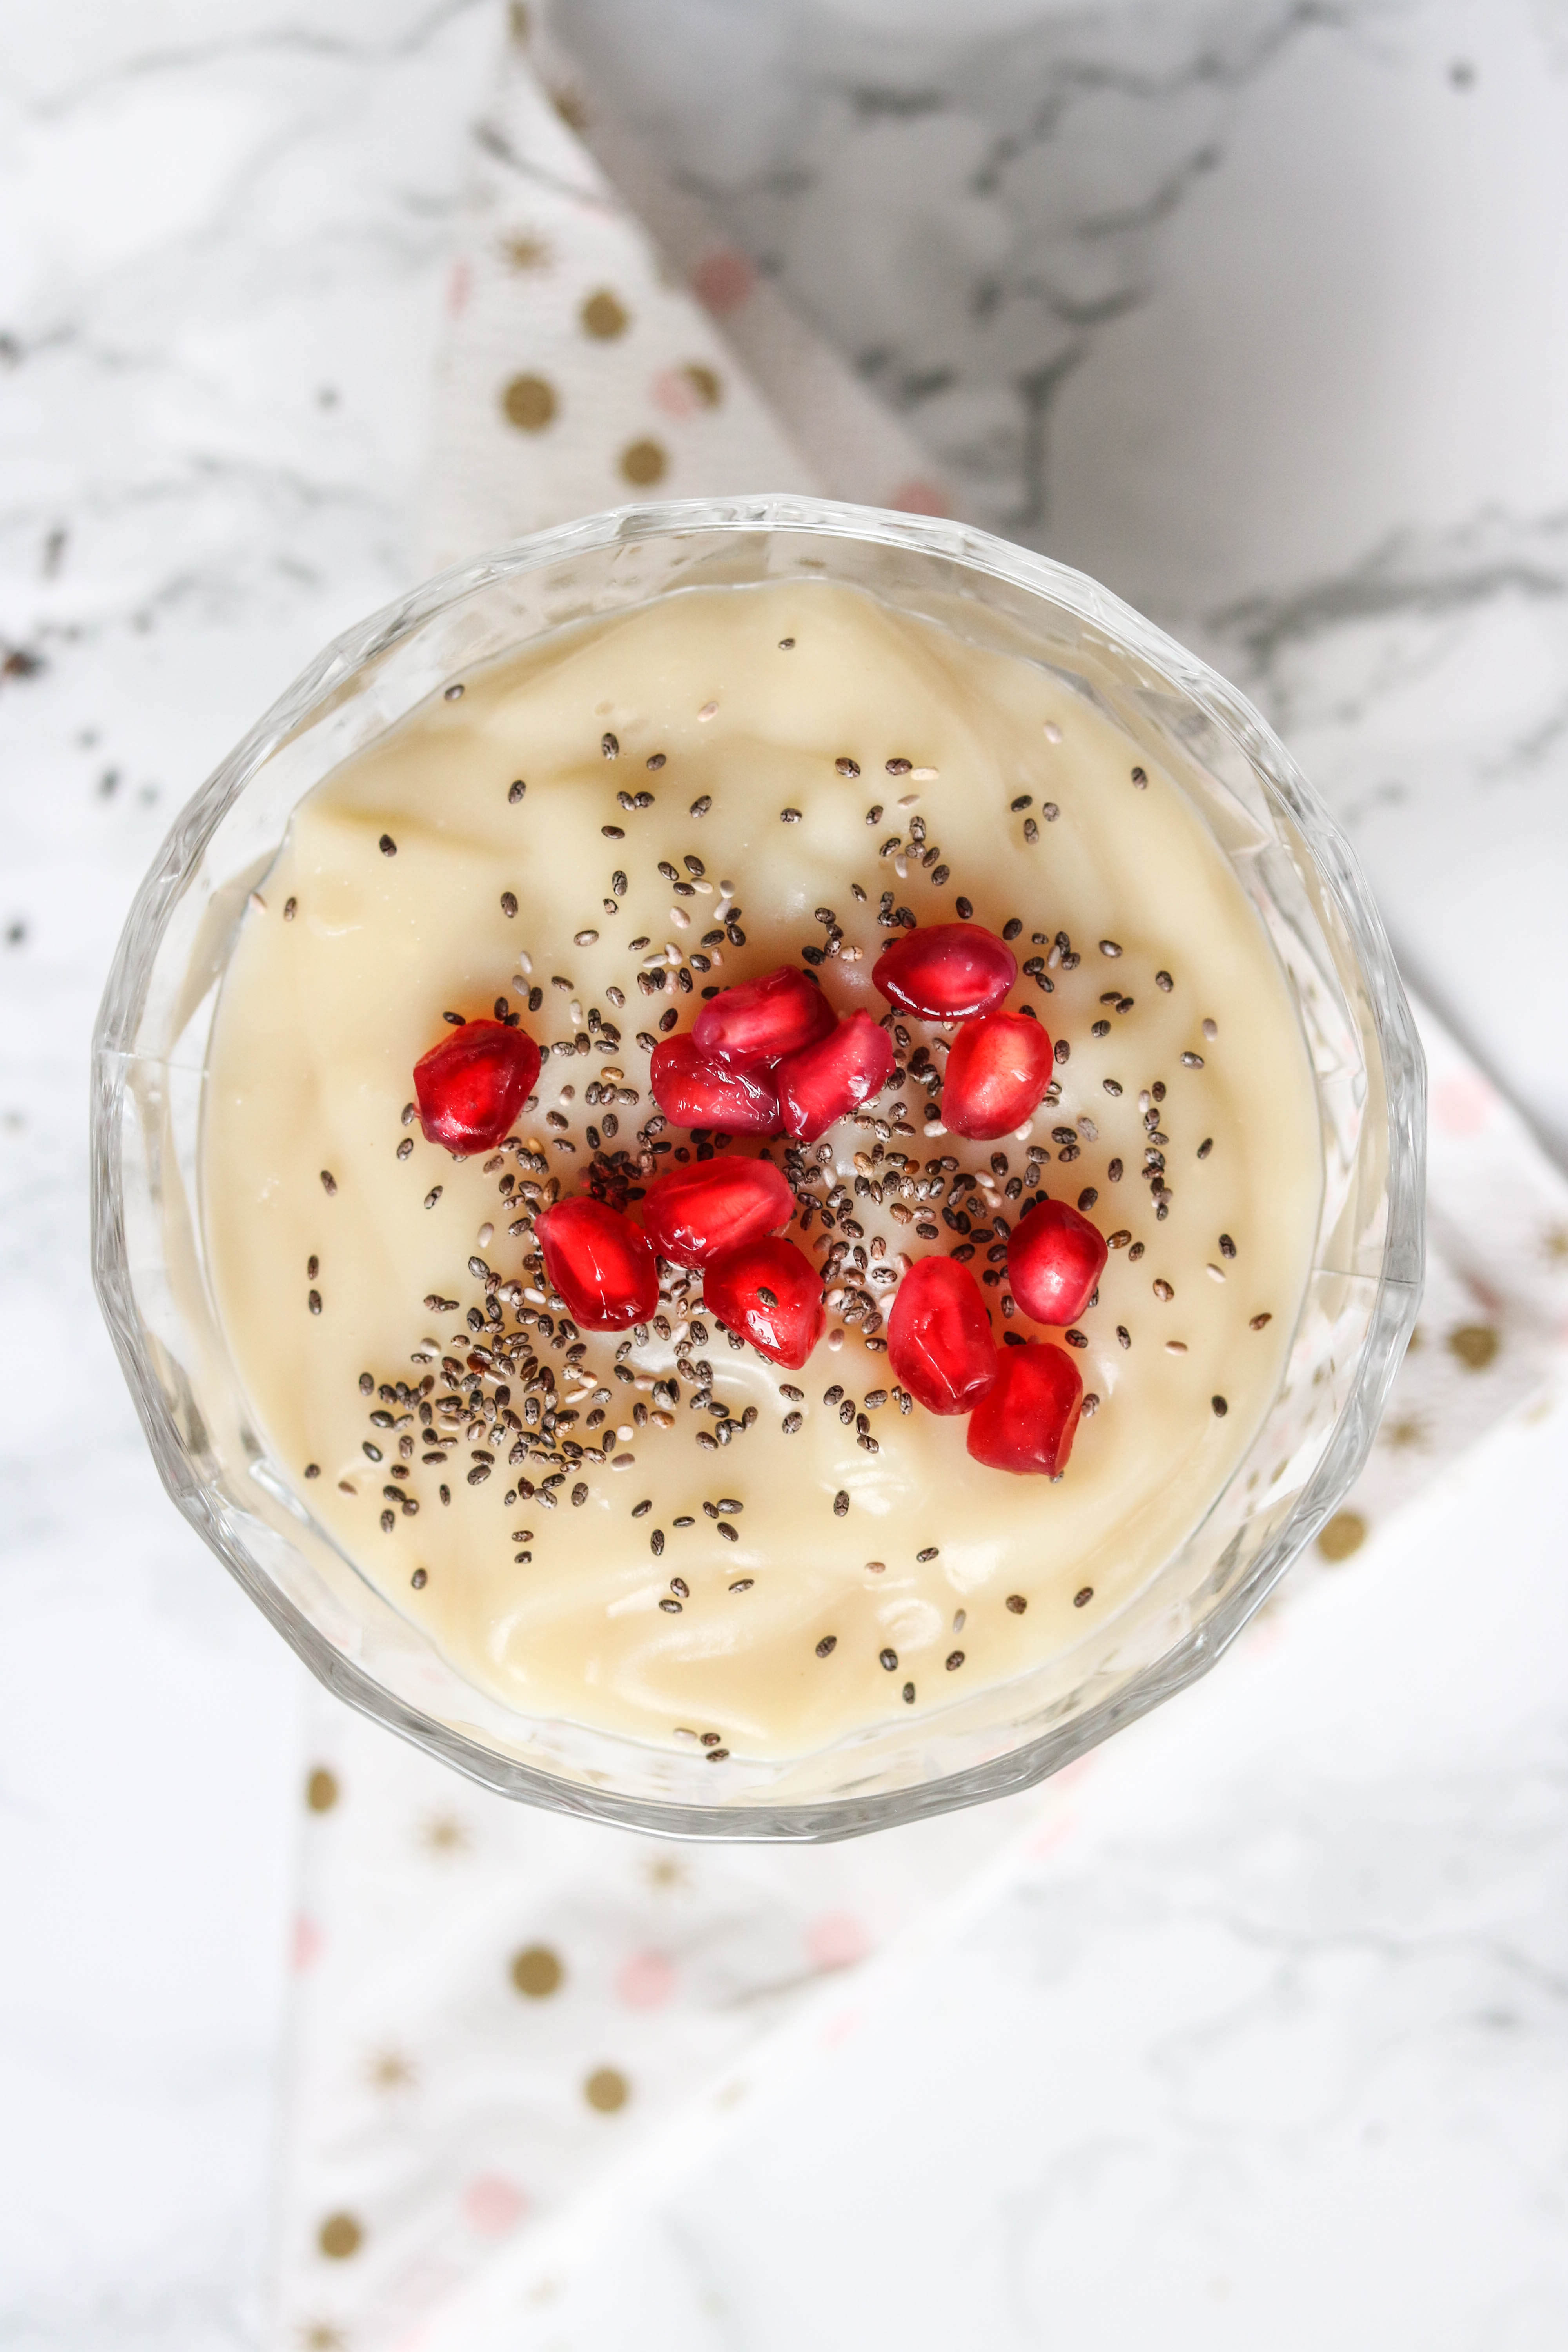 Who says you can't have custard? This delicious millet custard has a tropical flavour and is great as a quick sweet mis afternoon snack, or pudding.